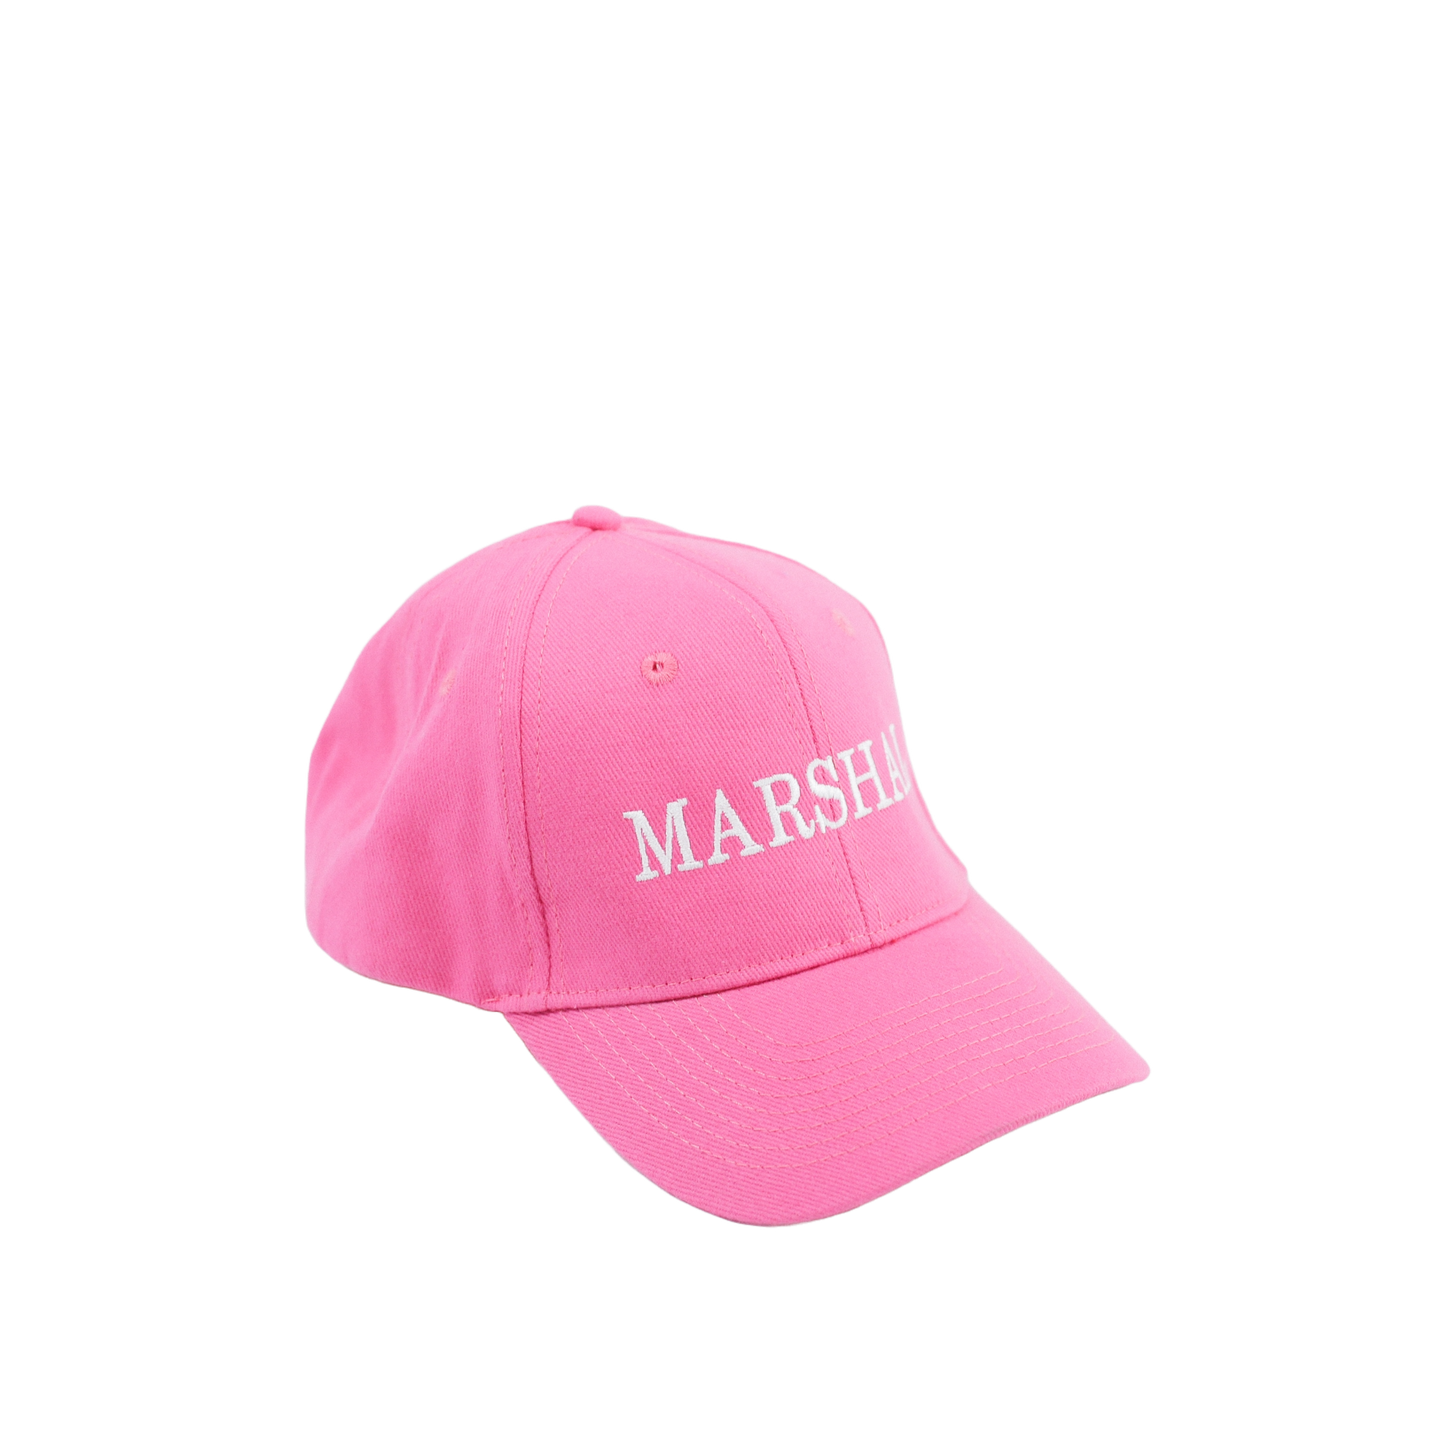 Cap for Marshalls | Pink